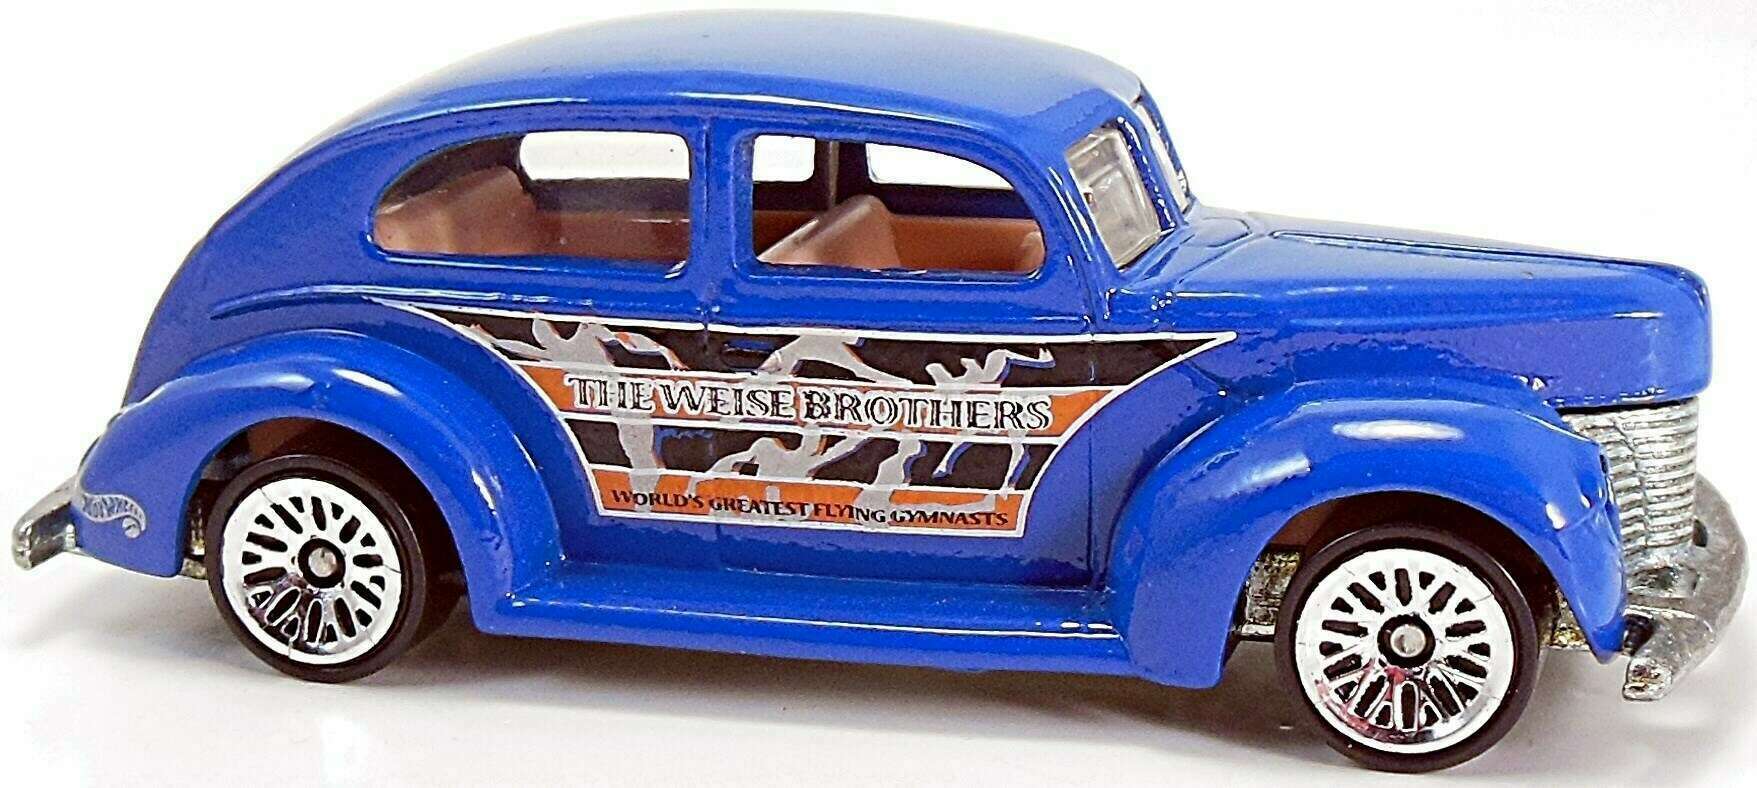 Hot Wheels 2000 - Collector # 027/250 - Circus on Wheels Series 3